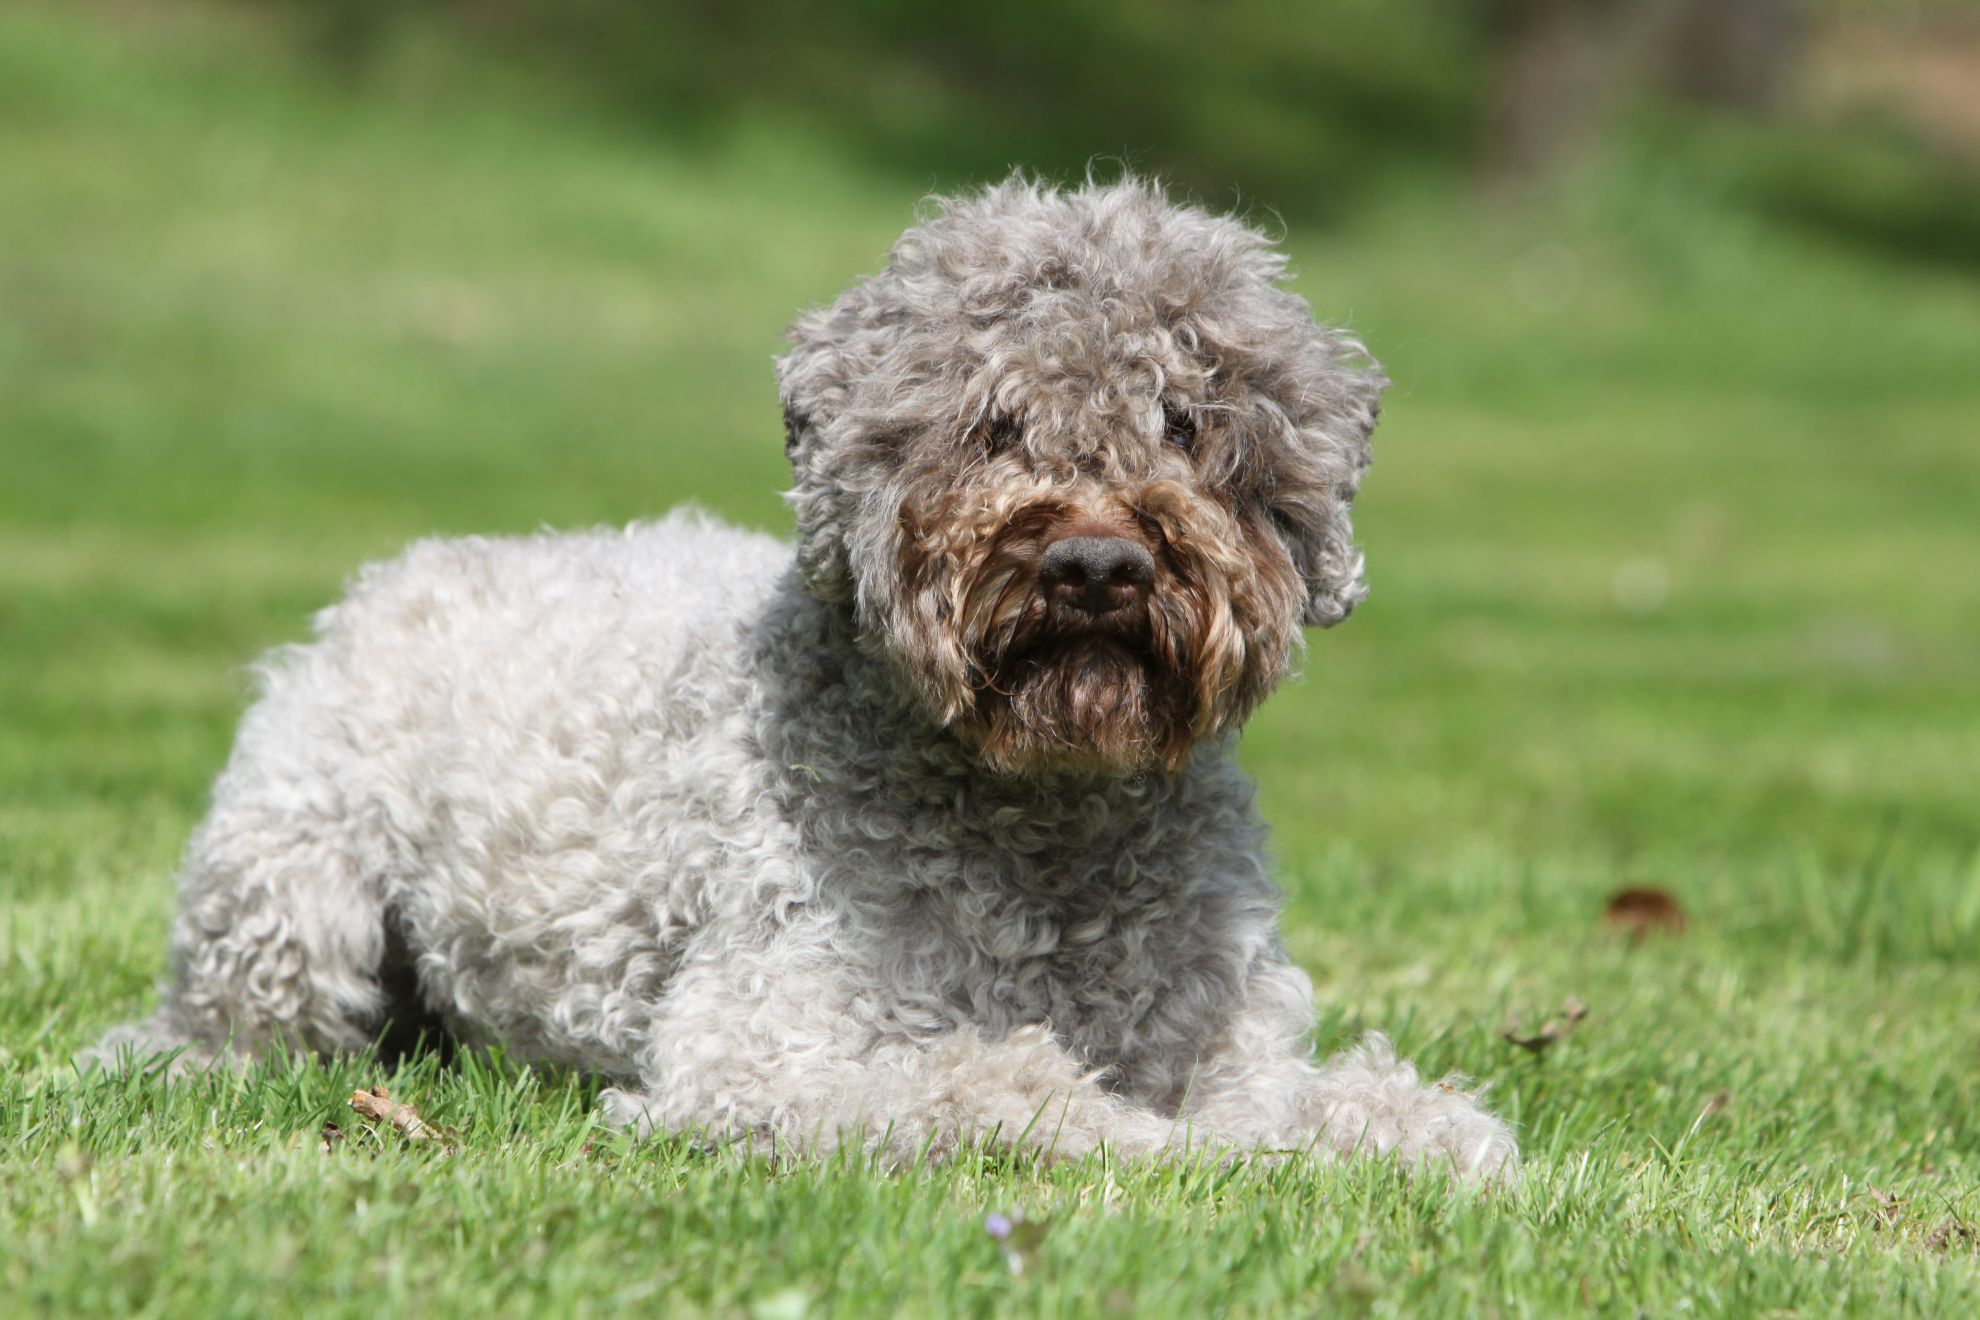 Grey Lagotto Romagnolo lying on grass looking at camera